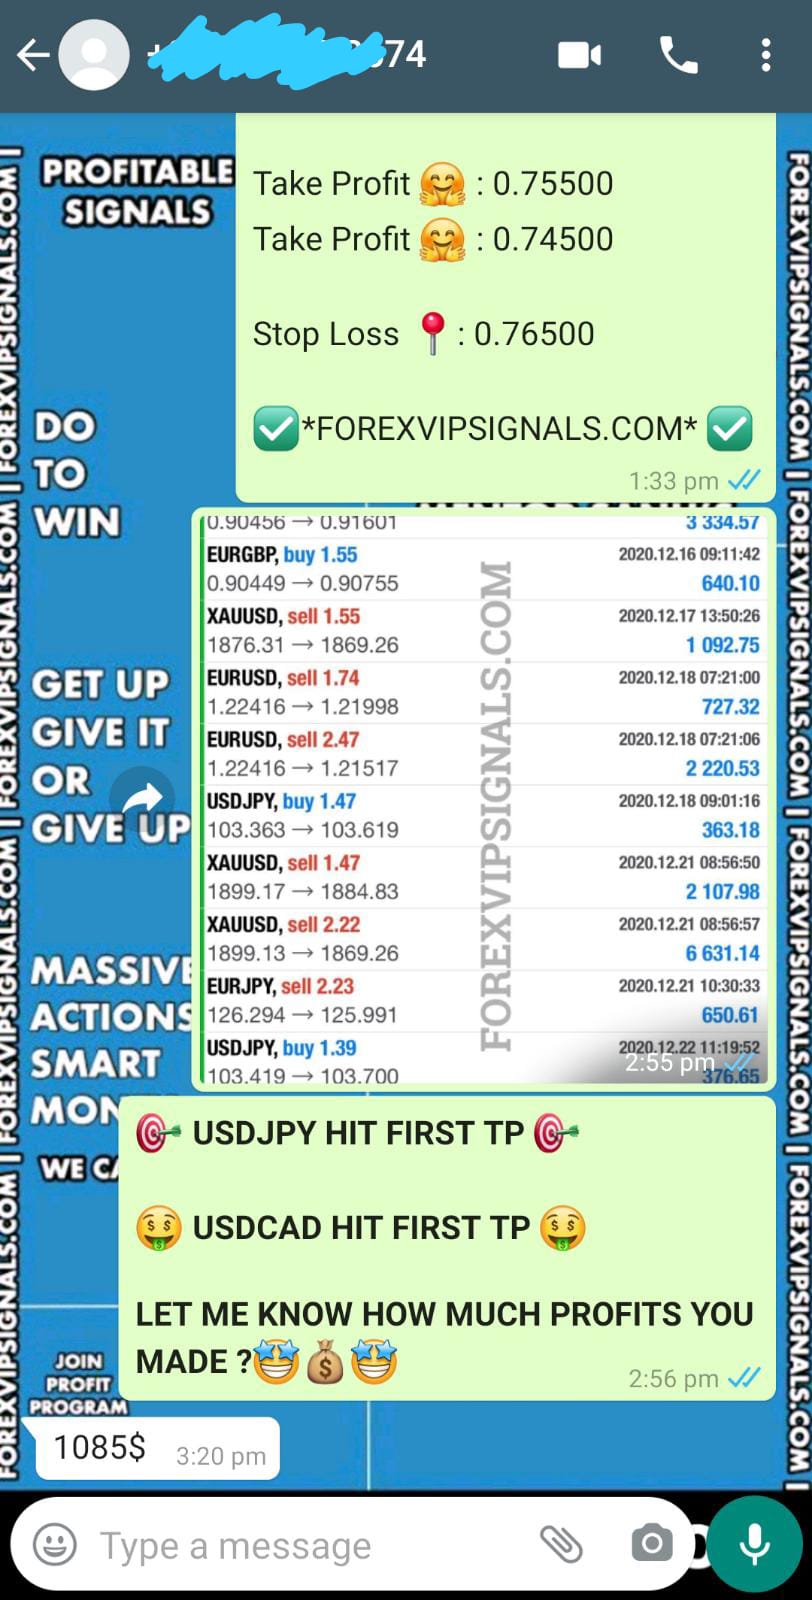 most accurate forex signals by forex vip signals